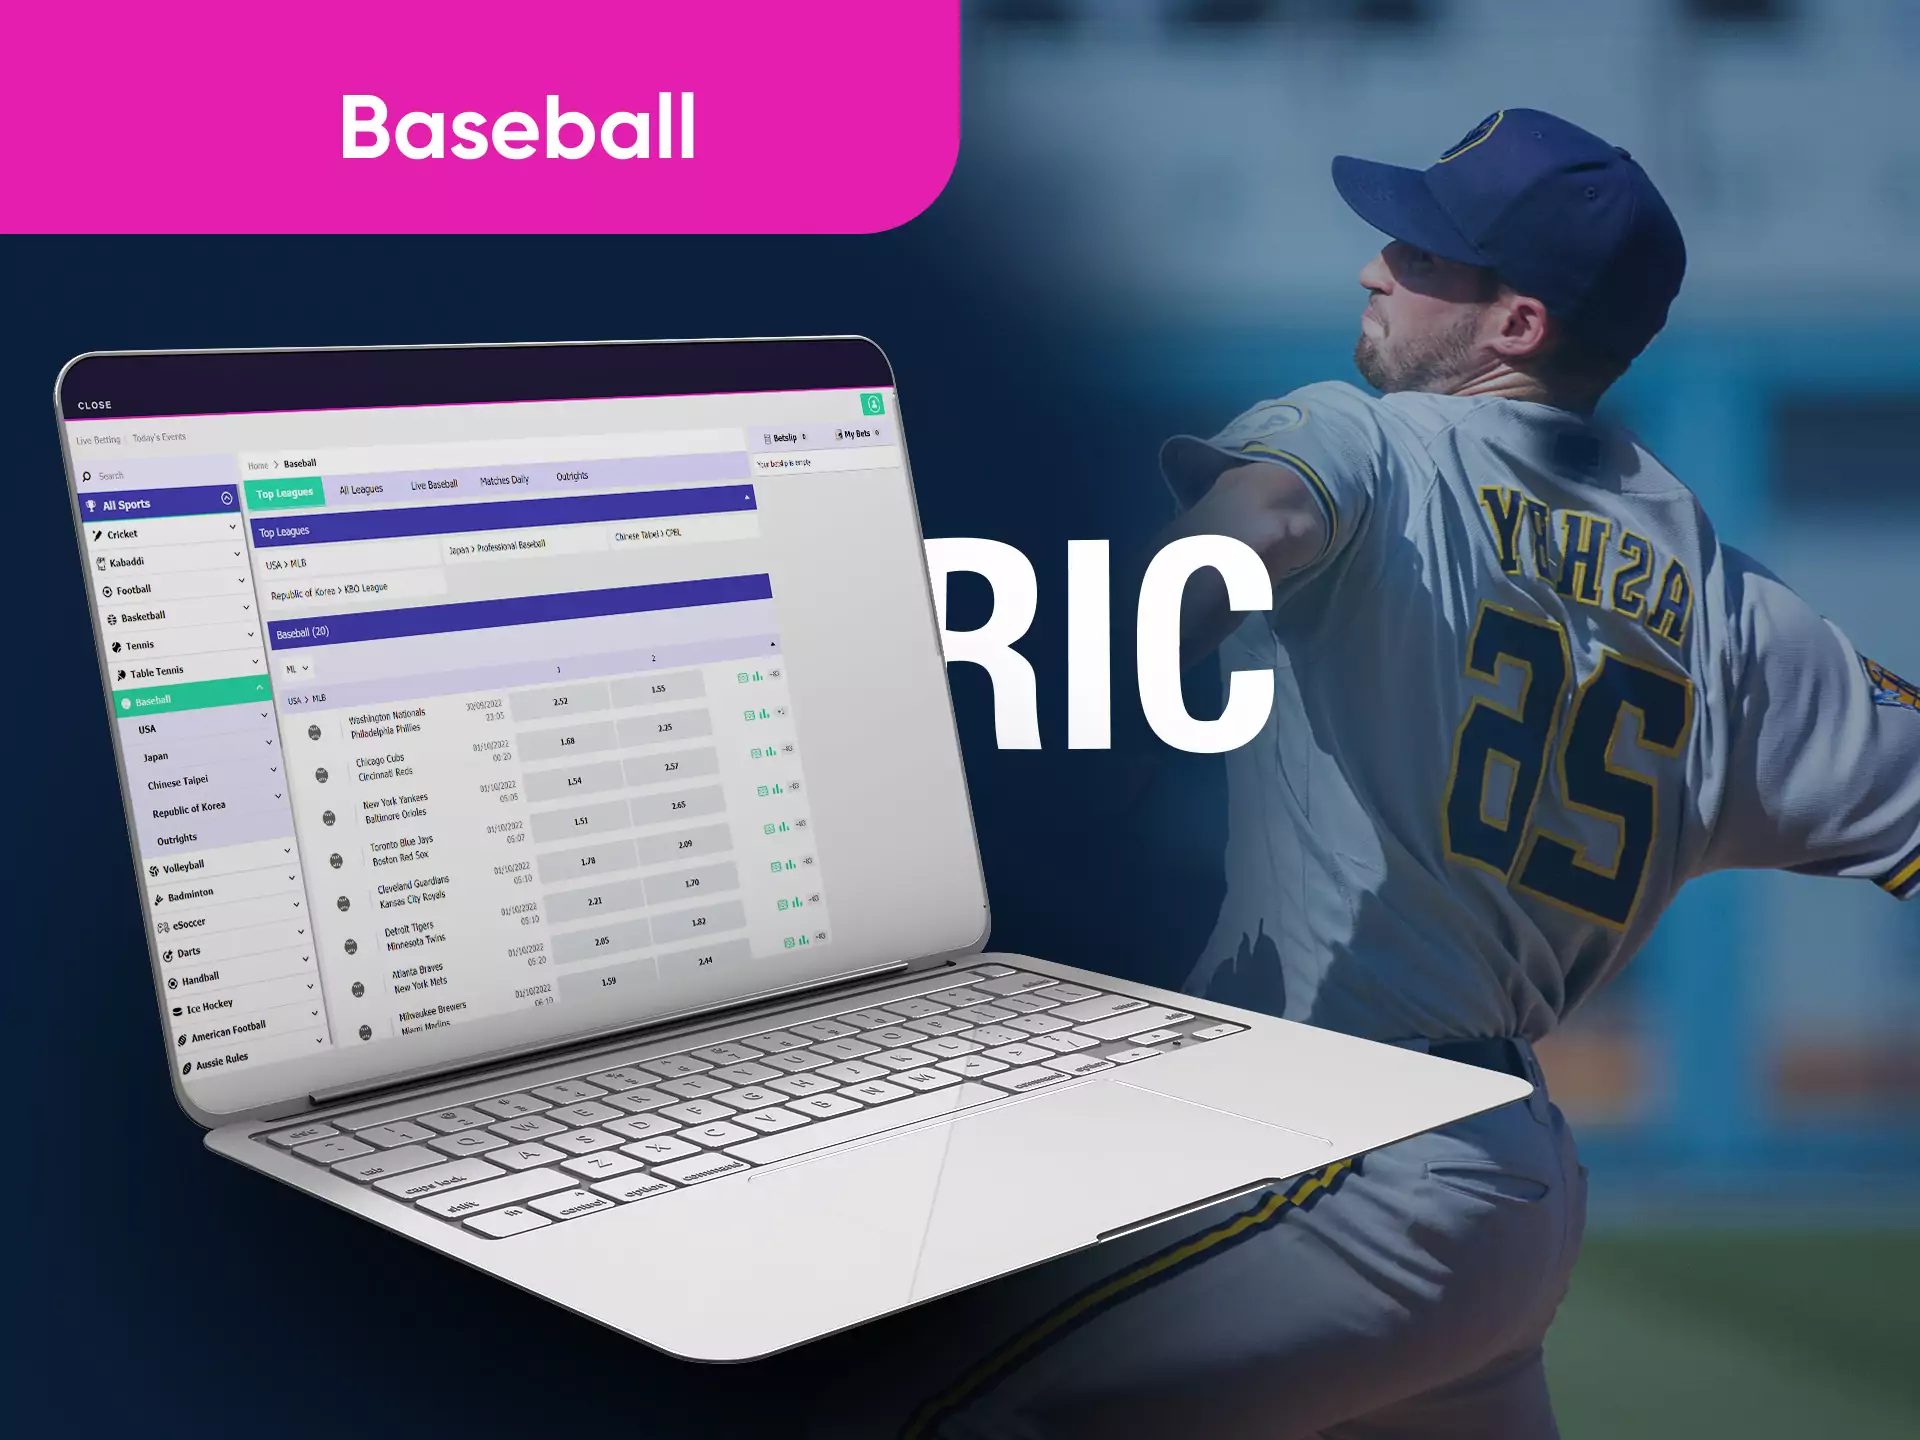 You can place bets on baseball matches on the Becric website.